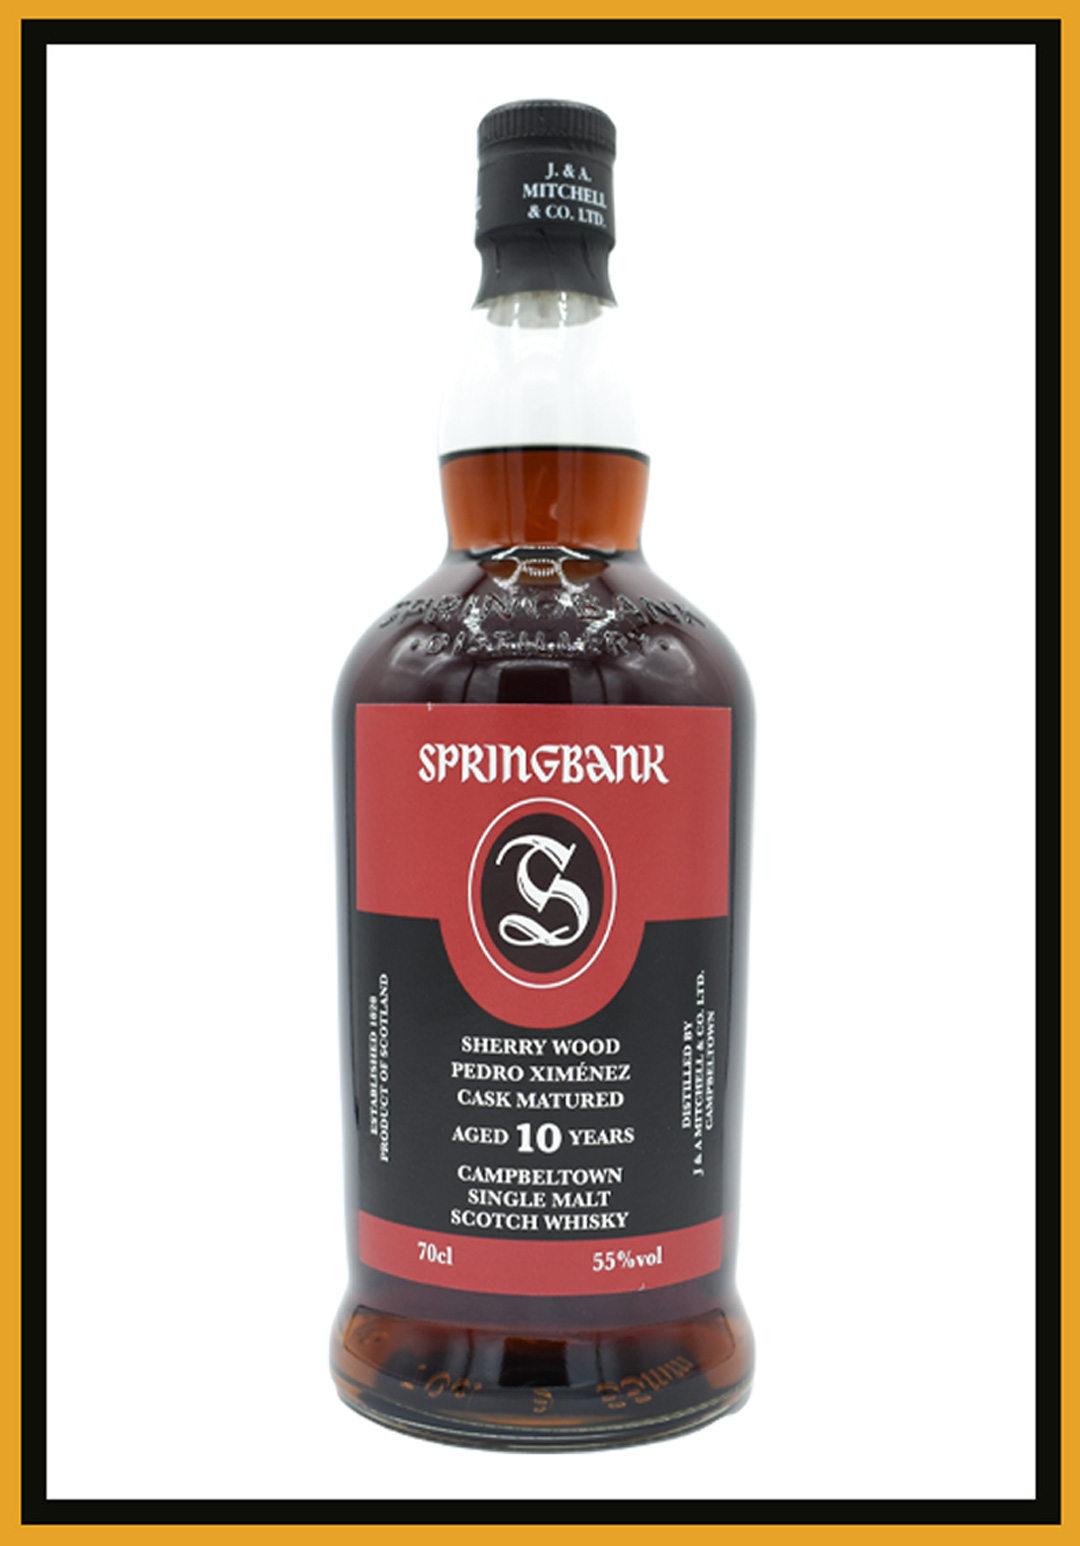 Image of a bottle of Springbank px